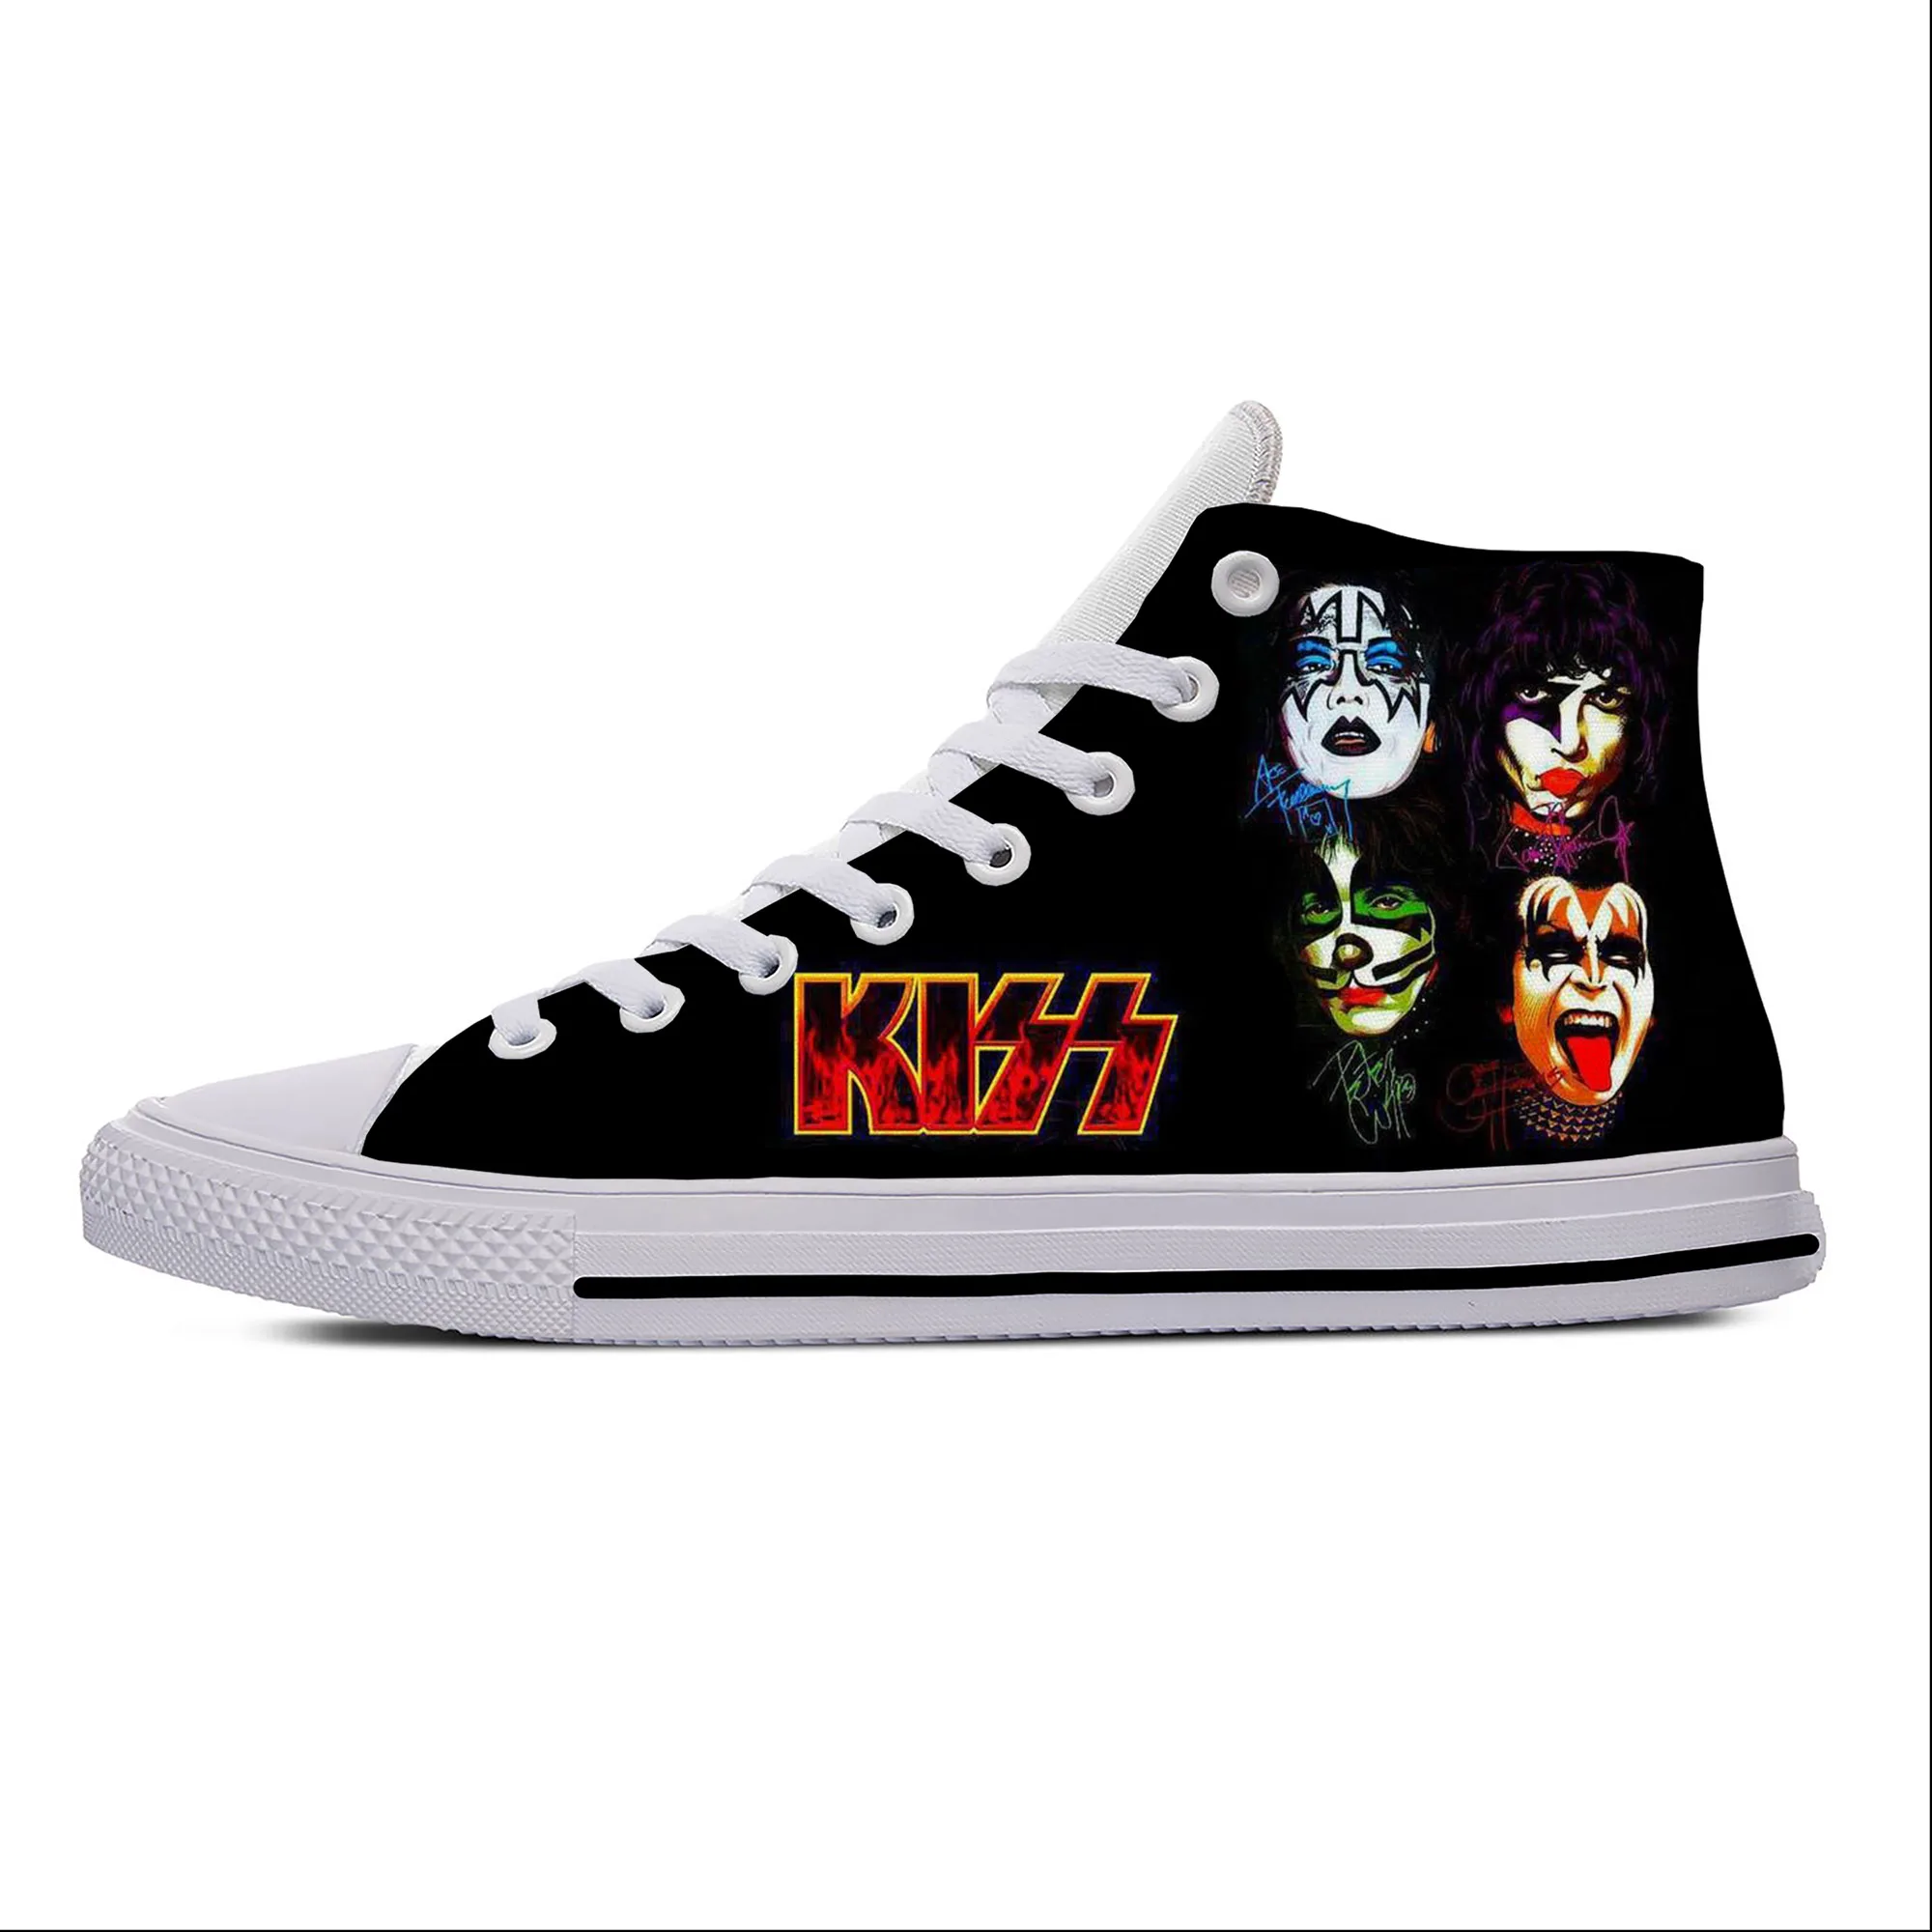 Heavy Metal Rock Band Kiss Music Fashion Funny Casual Cloth Shoes High Top Lightweight Breathable 3D Print Men Women Sneakers hx 2021 fashion hip hop rock metal kiss band casual 3d print mens women pants unisex trousers autumn sweatpants drop shipping